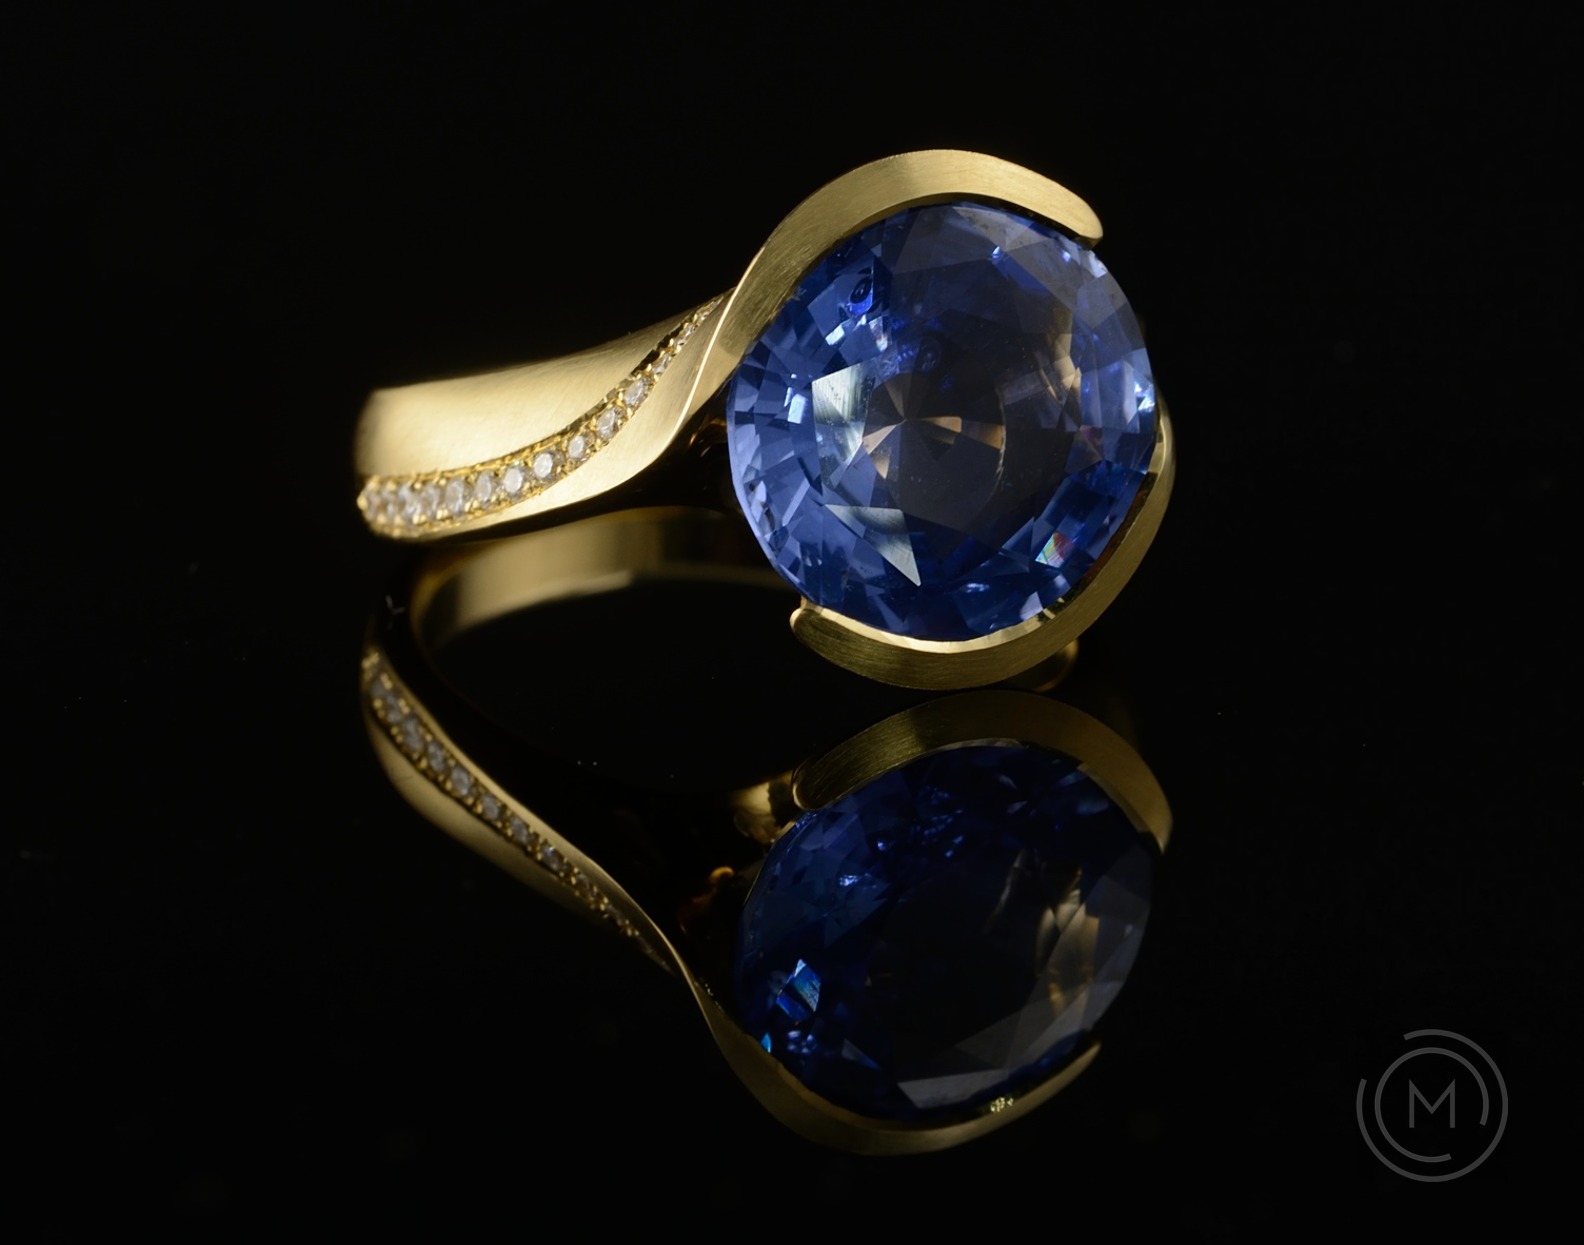 Carved yellow gold cocktail ring with large blue sapphire and white diamonds